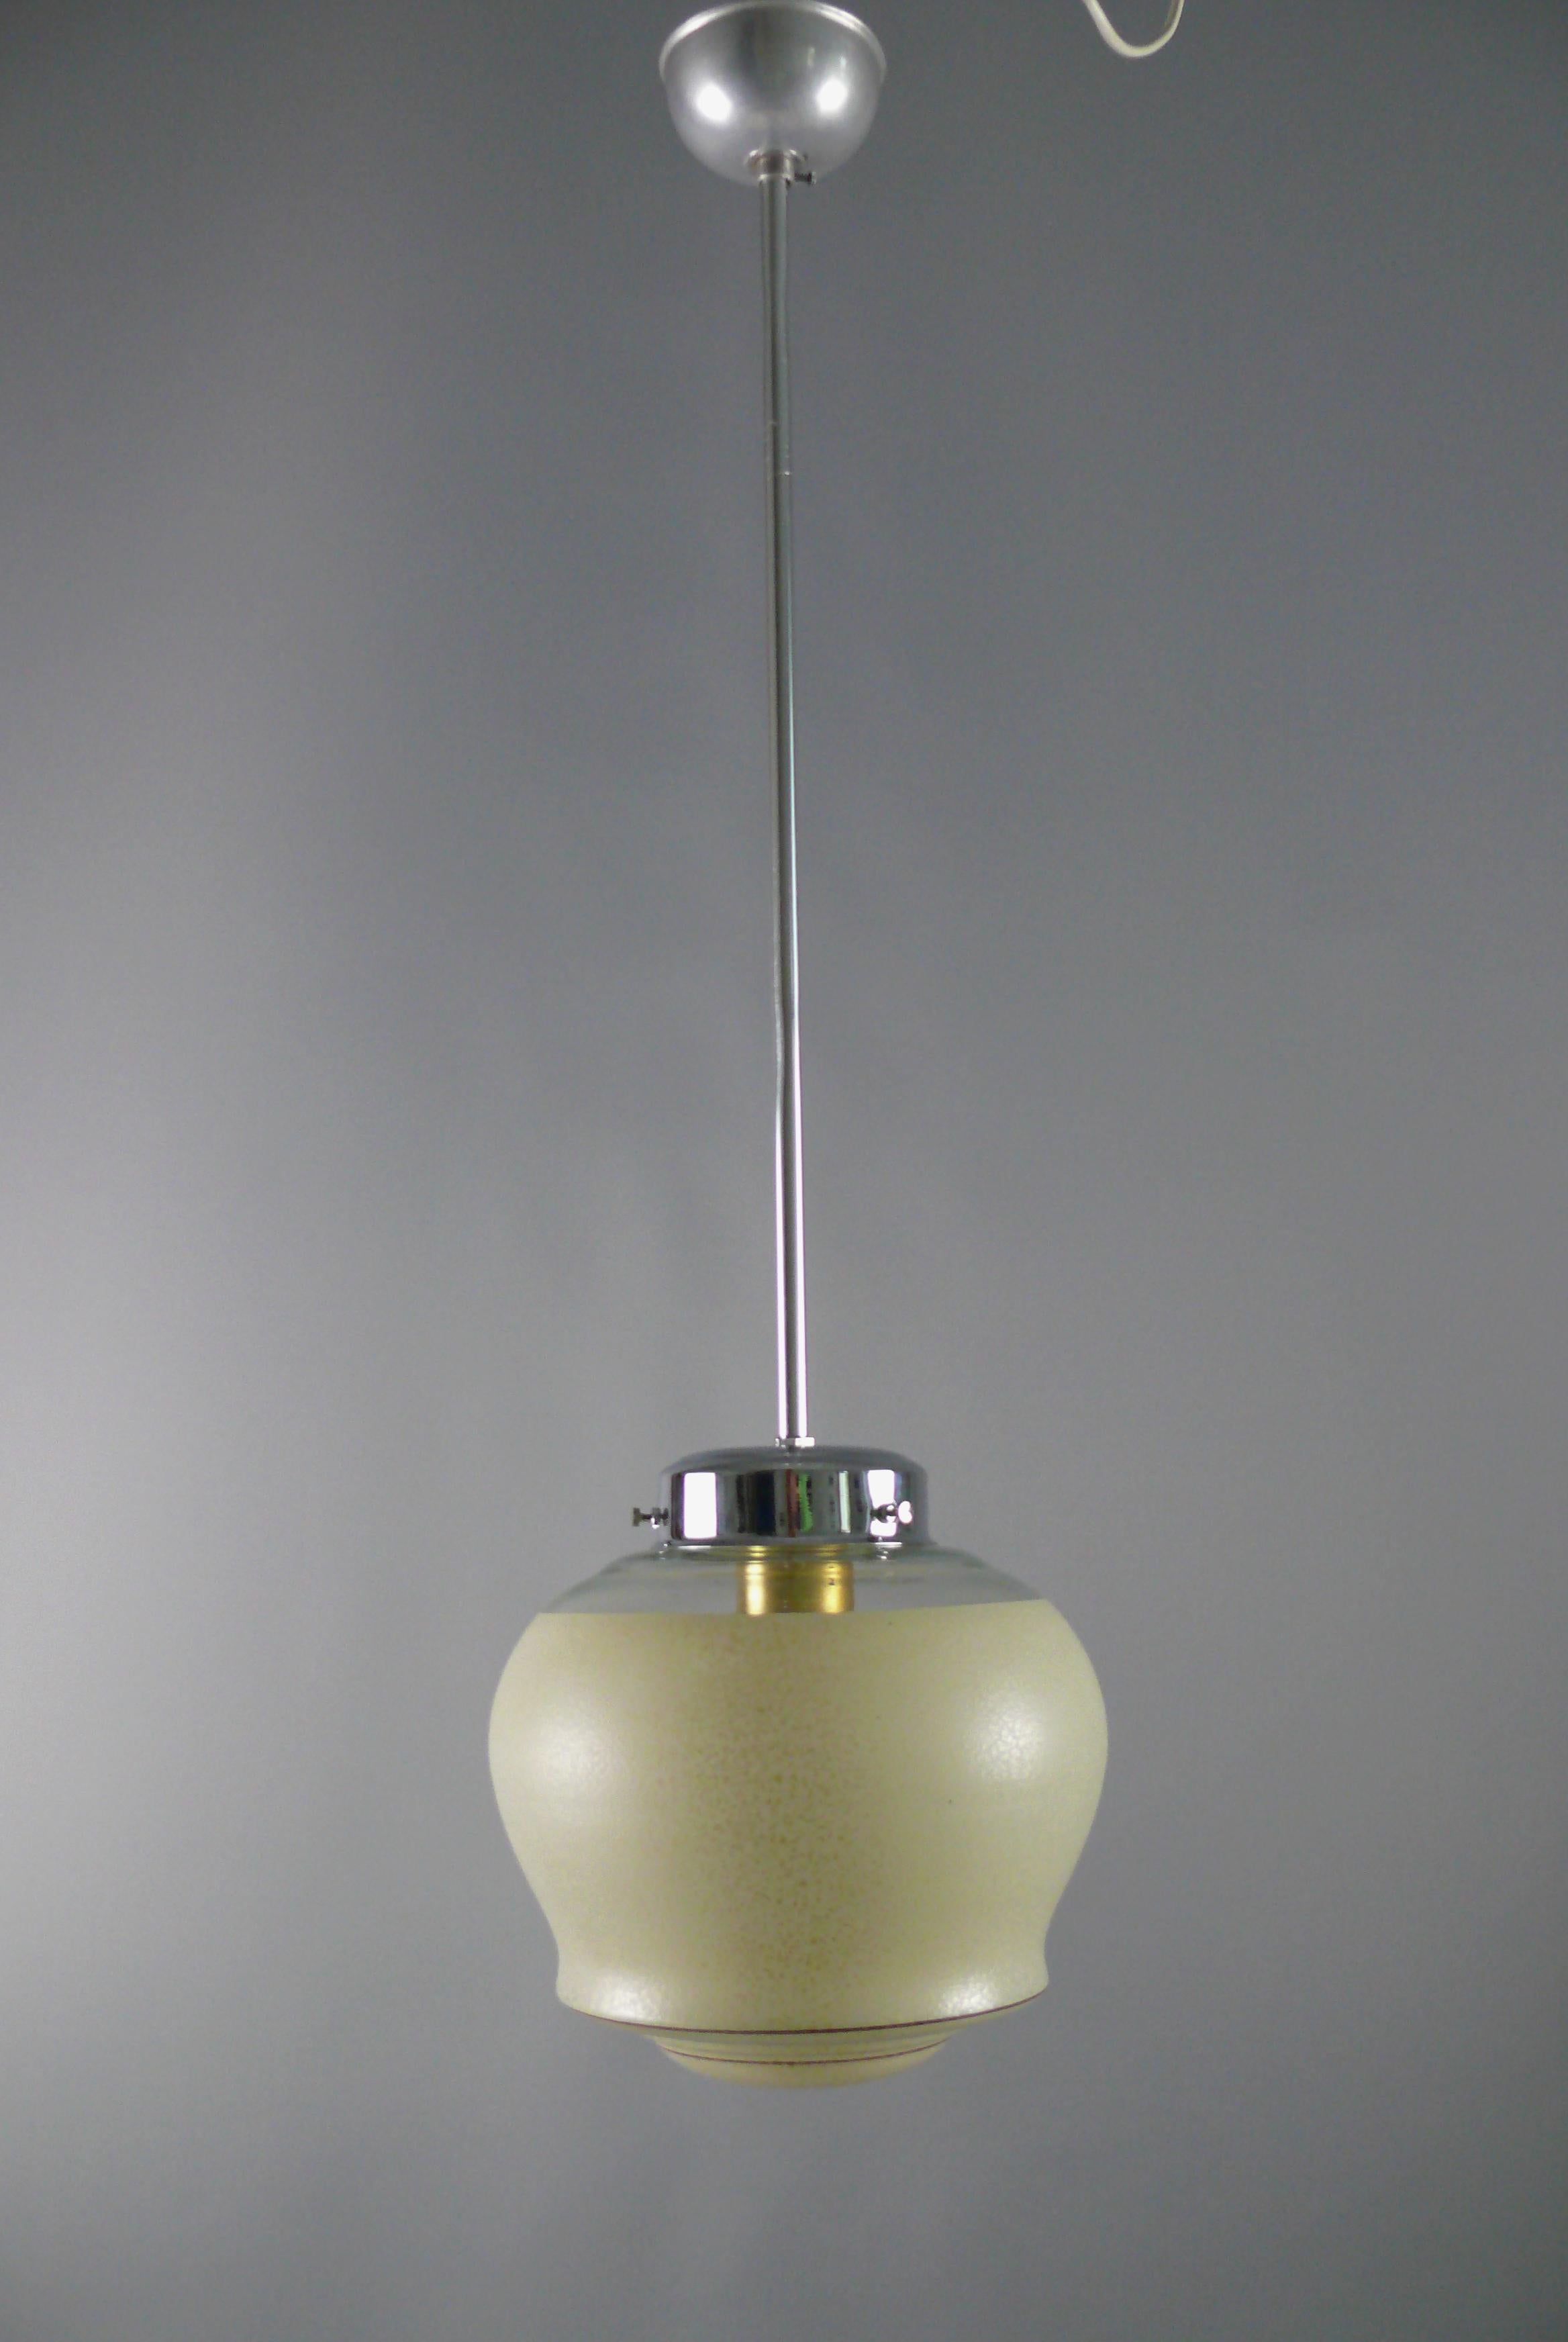 Art Deco rod pendant light from the 1930s - 1950s with a very beautiful profiled glass shade. The glass shade has radial decorative stripes, the lower part has a dotted beige lacquer, similar to pointillism, the upper part is transparent and is in